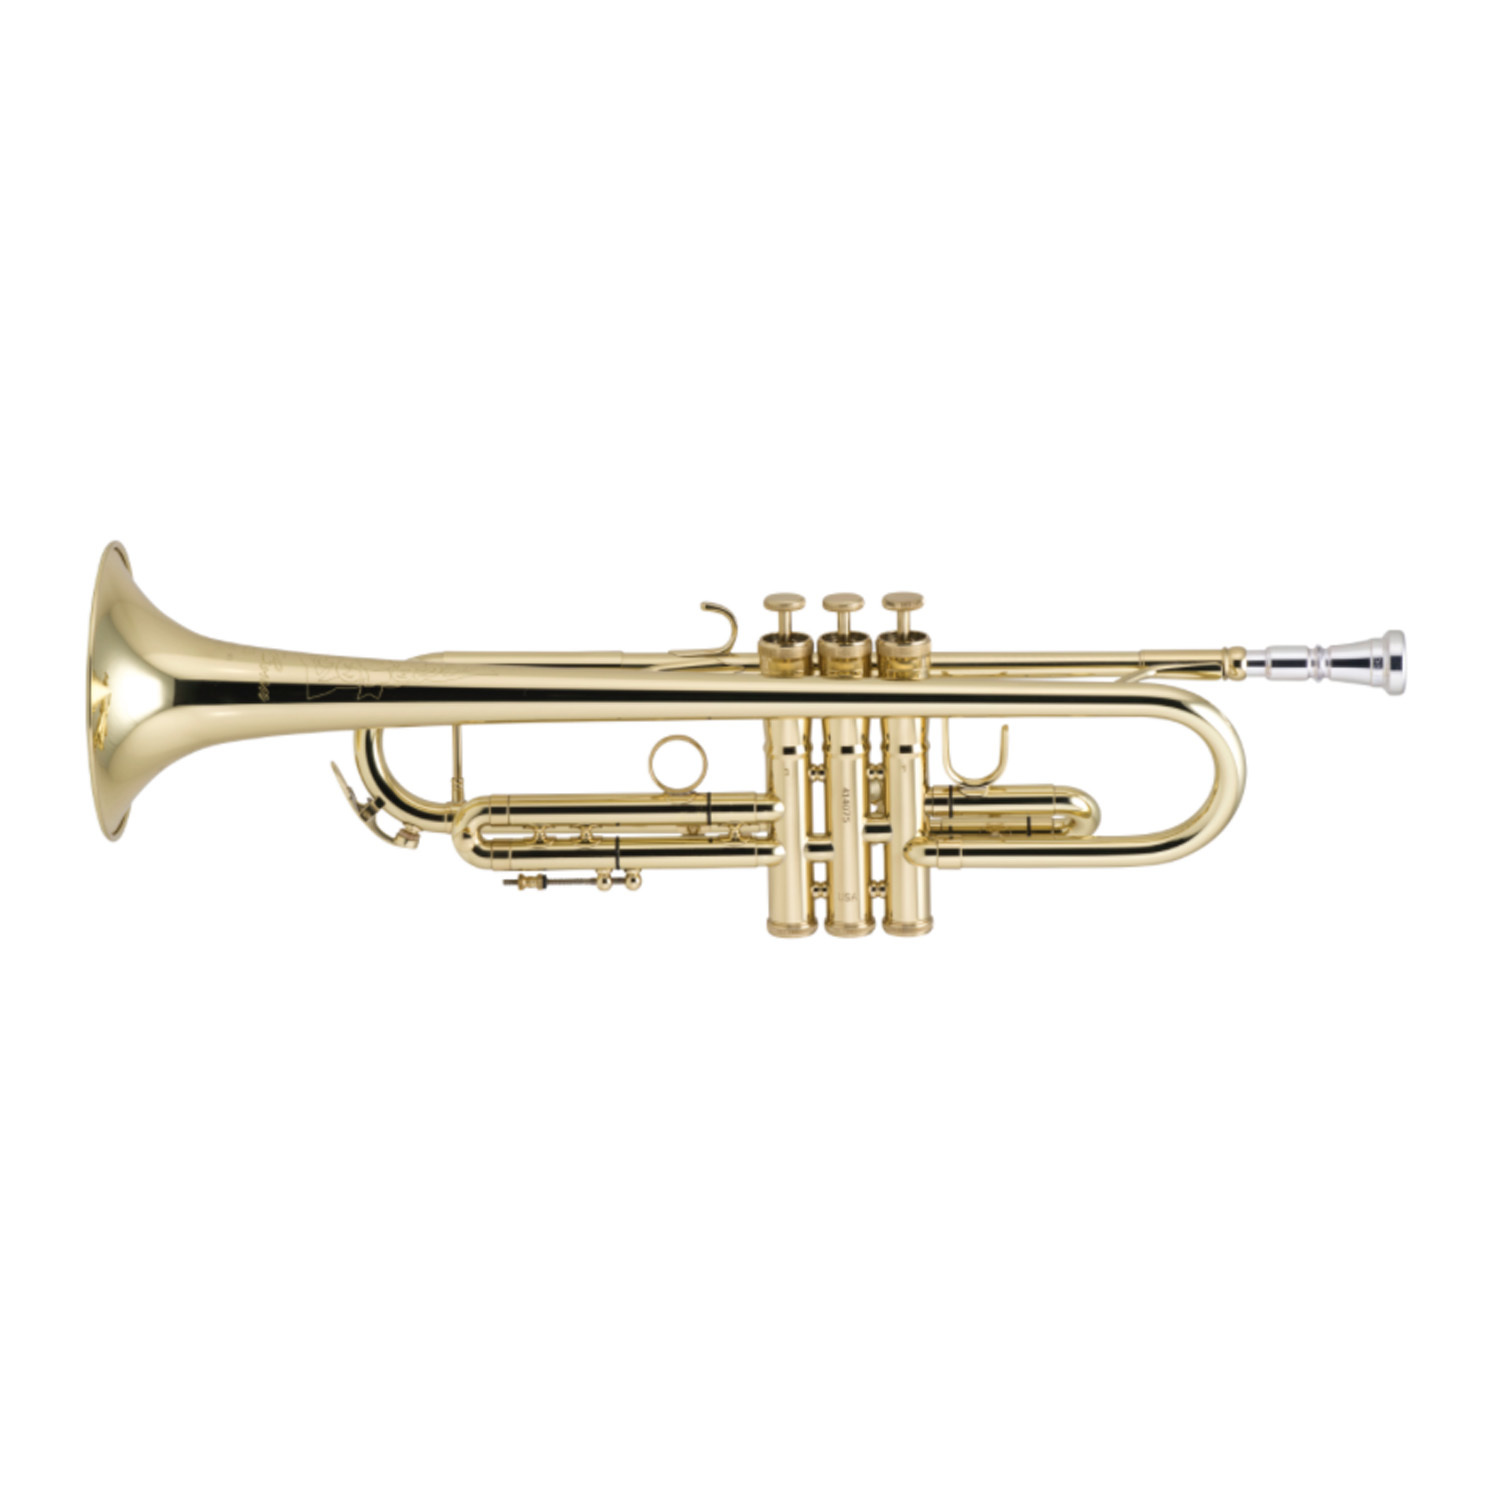 Conn connellation trumpet dating